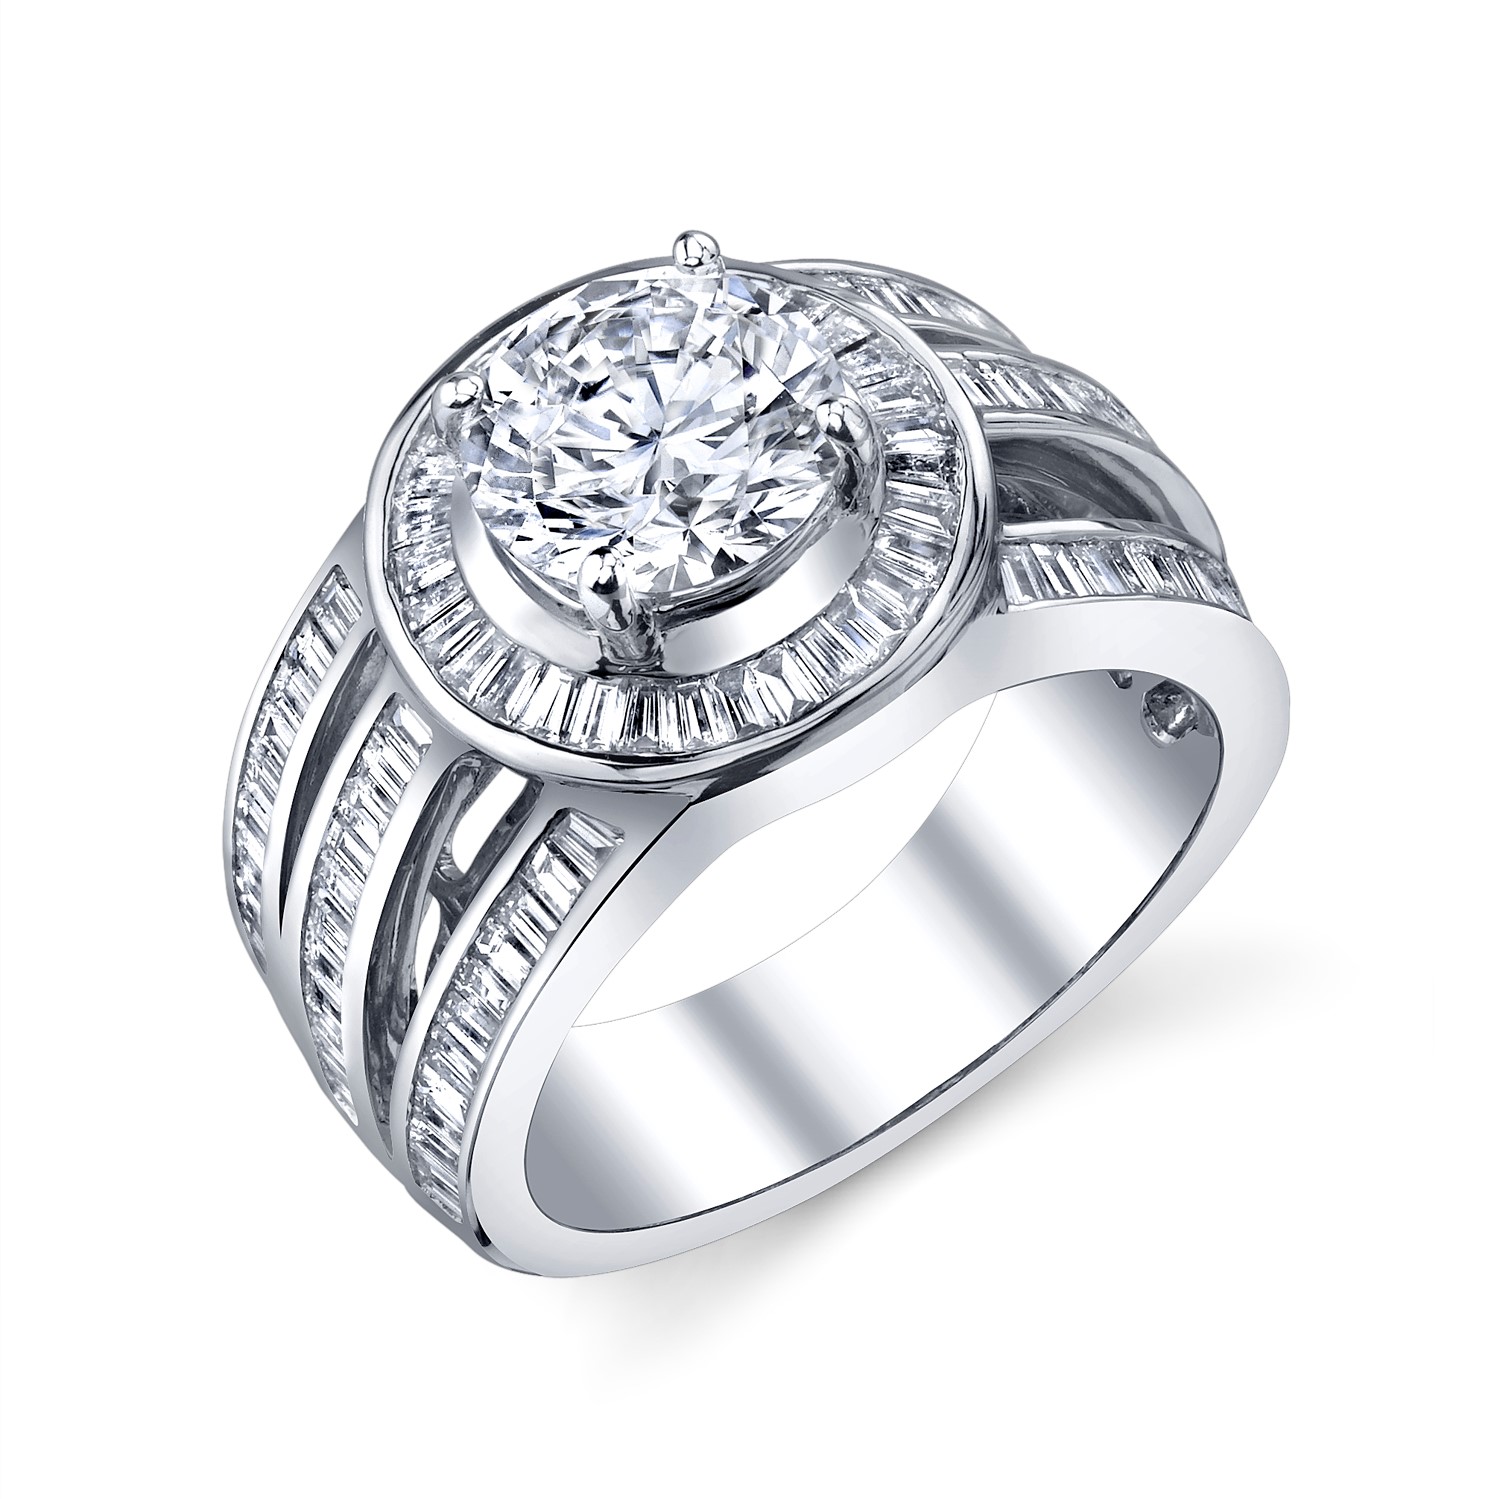 Check Out Our Custom Split Shank 3 Stone Engagement Ring